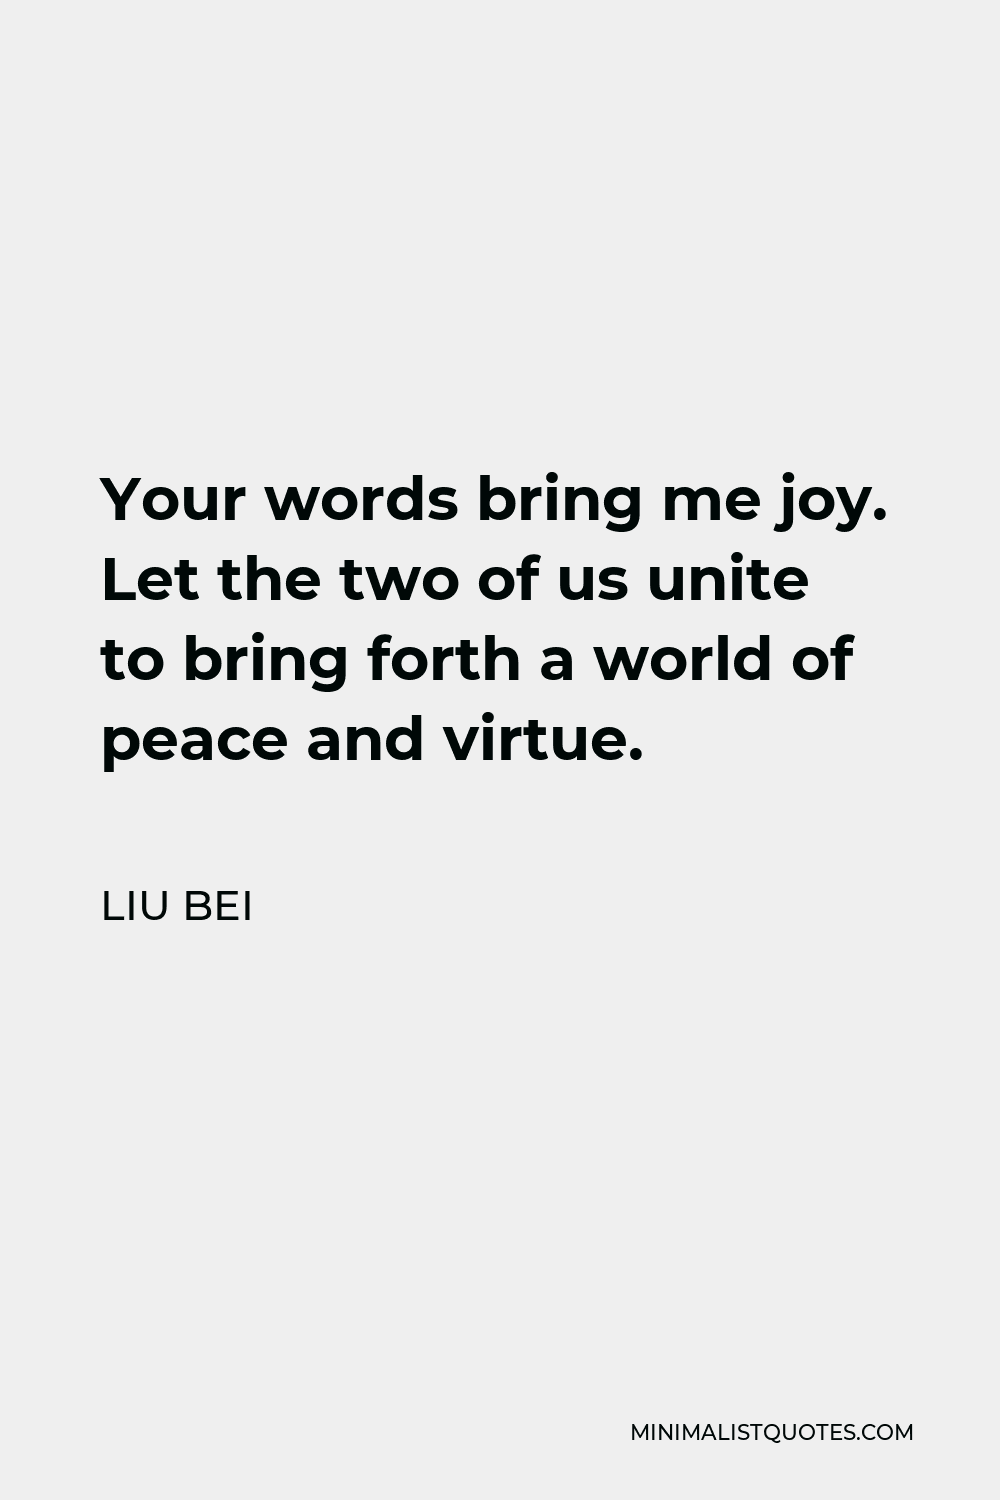 Liu Bei quote: Your words bring me joy. Let the two of us